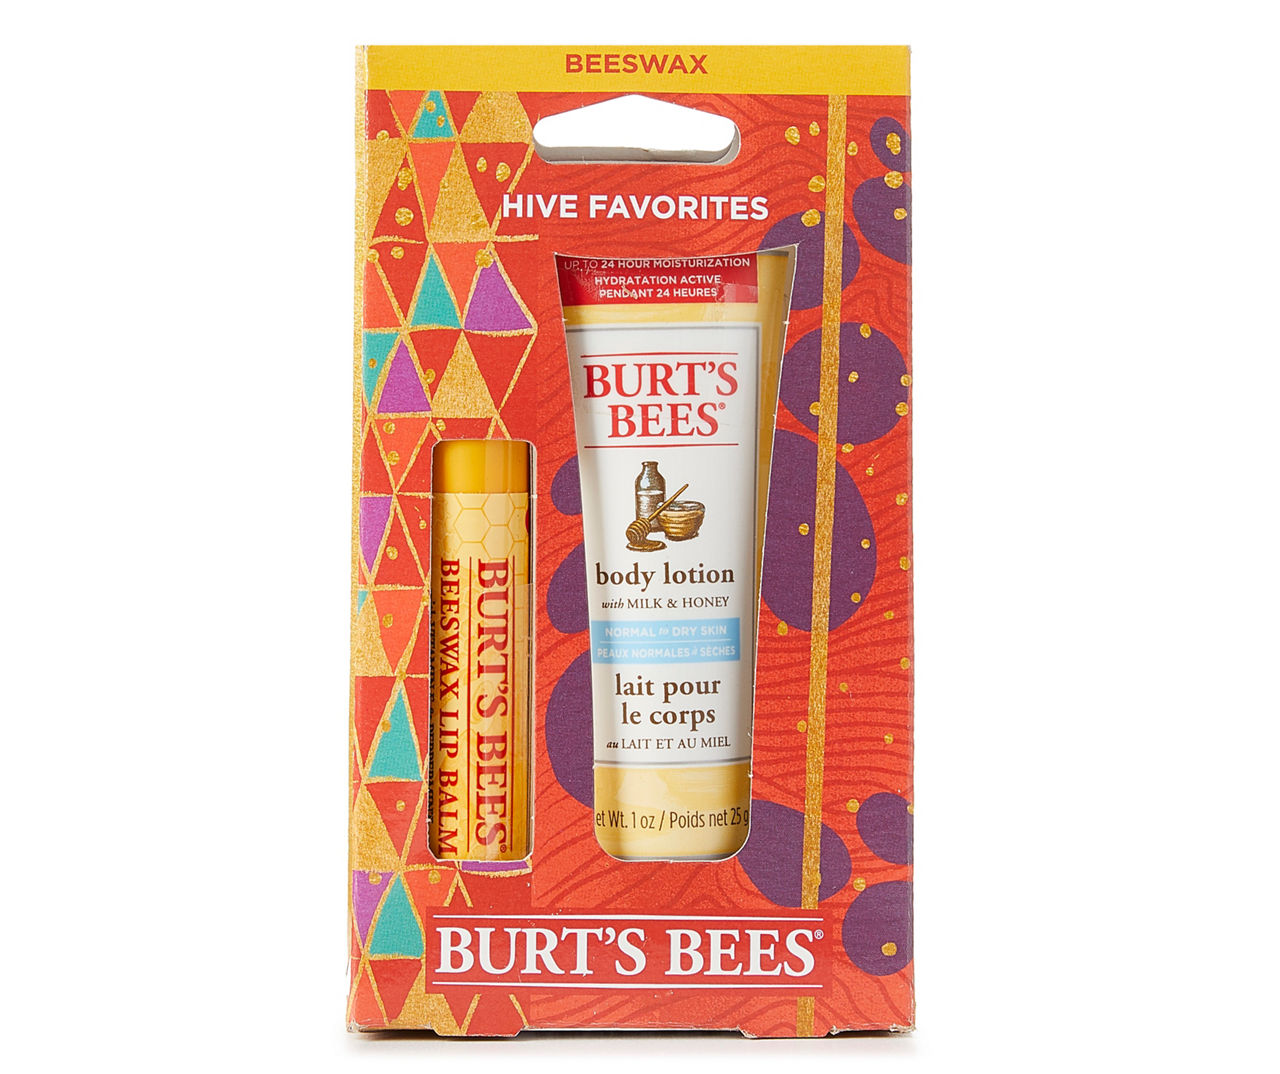 Hive Favorites - Beeswax Lip Balm & Travel Size Body Lotion